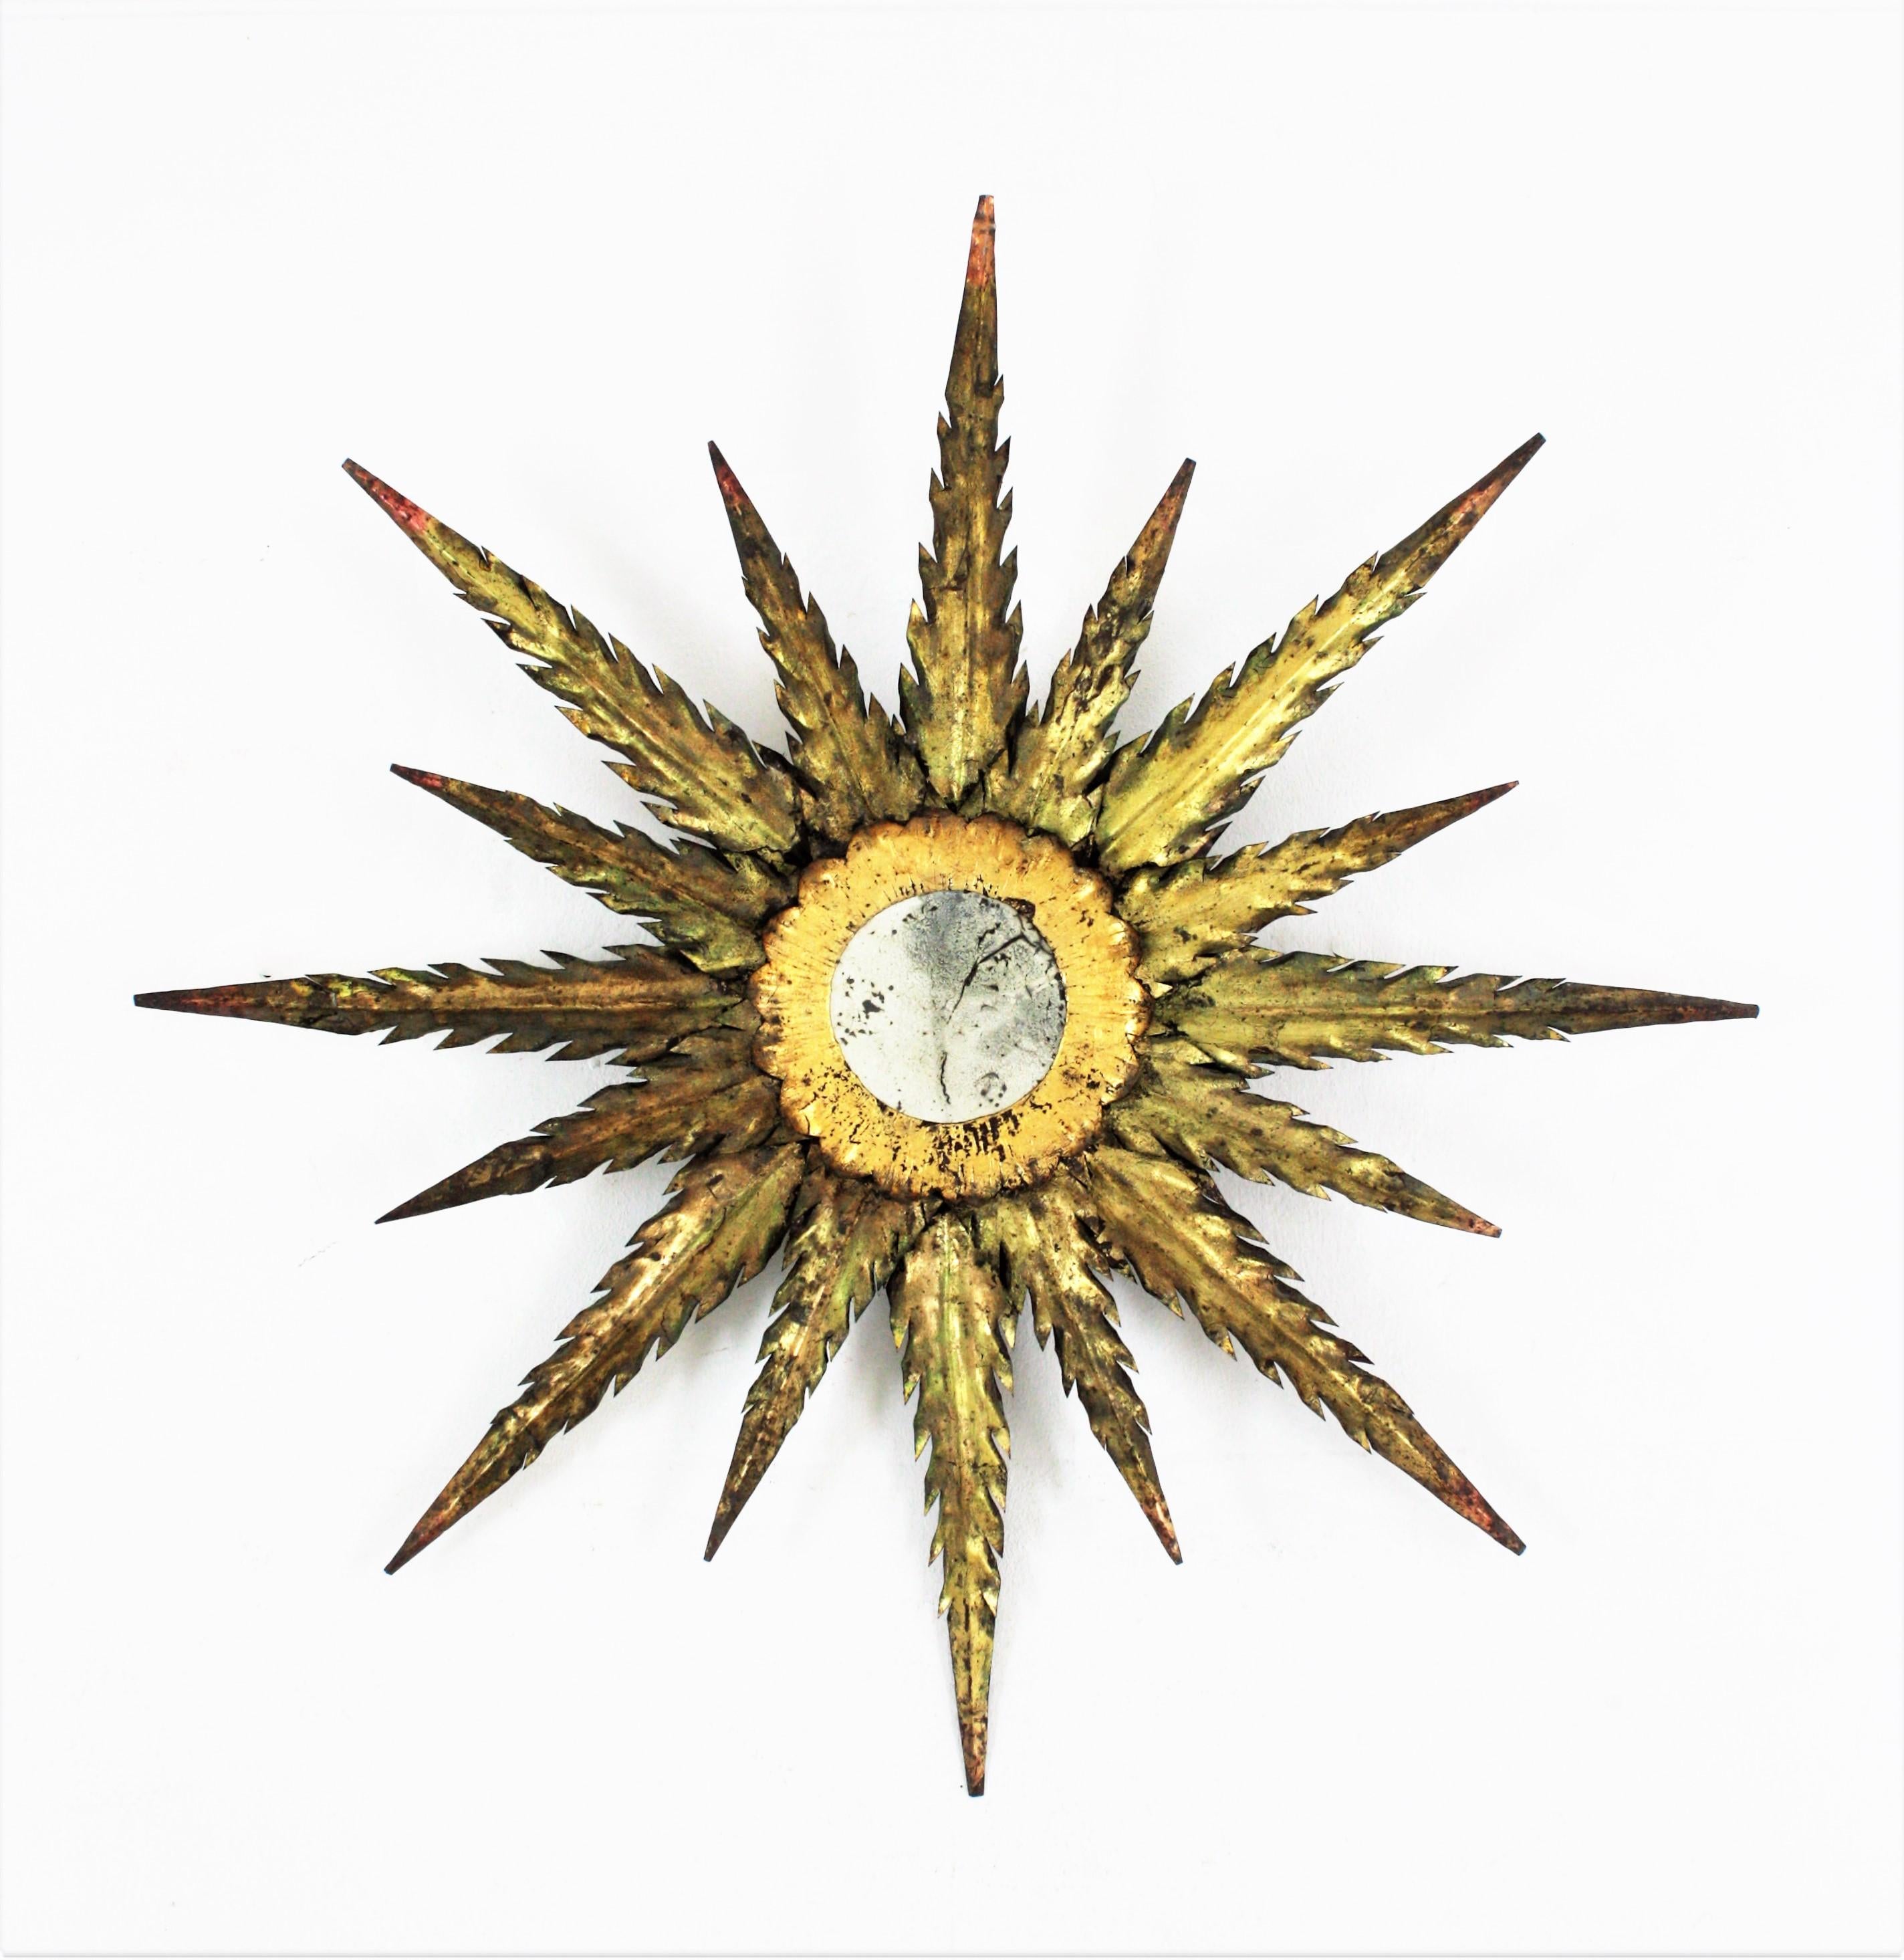 Rare handcrafted parcel-gilt iron sunburst / starburst shaped wall mirror, Spain, 1940s-1950s.
This Brutalist mirror has two layers of rays in different sizes with jagged pointed edges. It has a terrific aged patina gold leaf finish and green